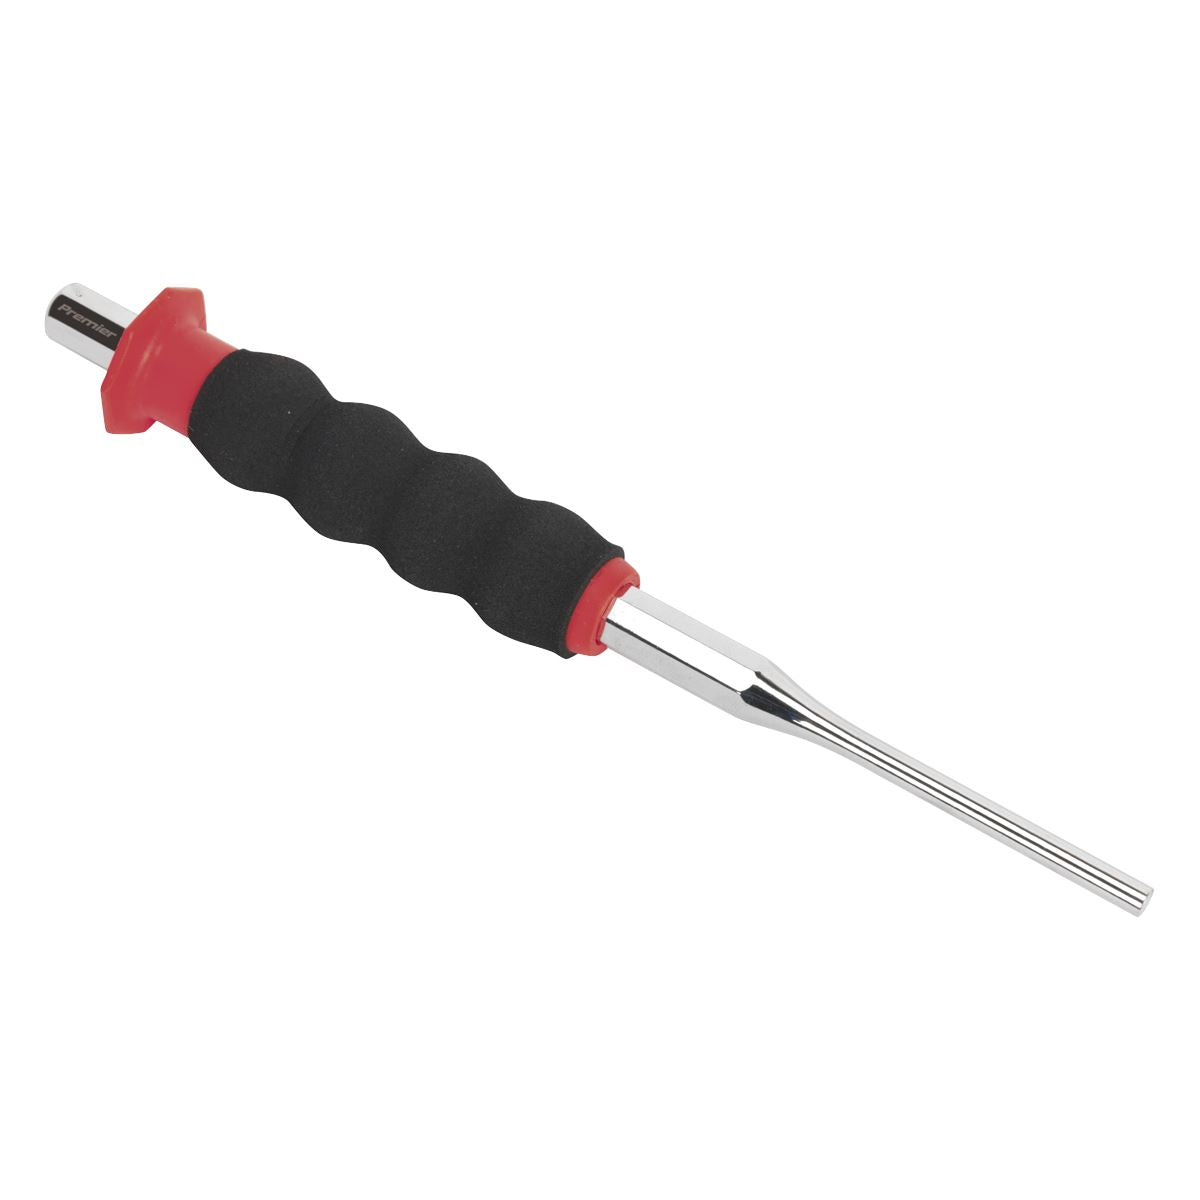 Sealey Premier Sheathed Parallel Pin Punch Ø5mm